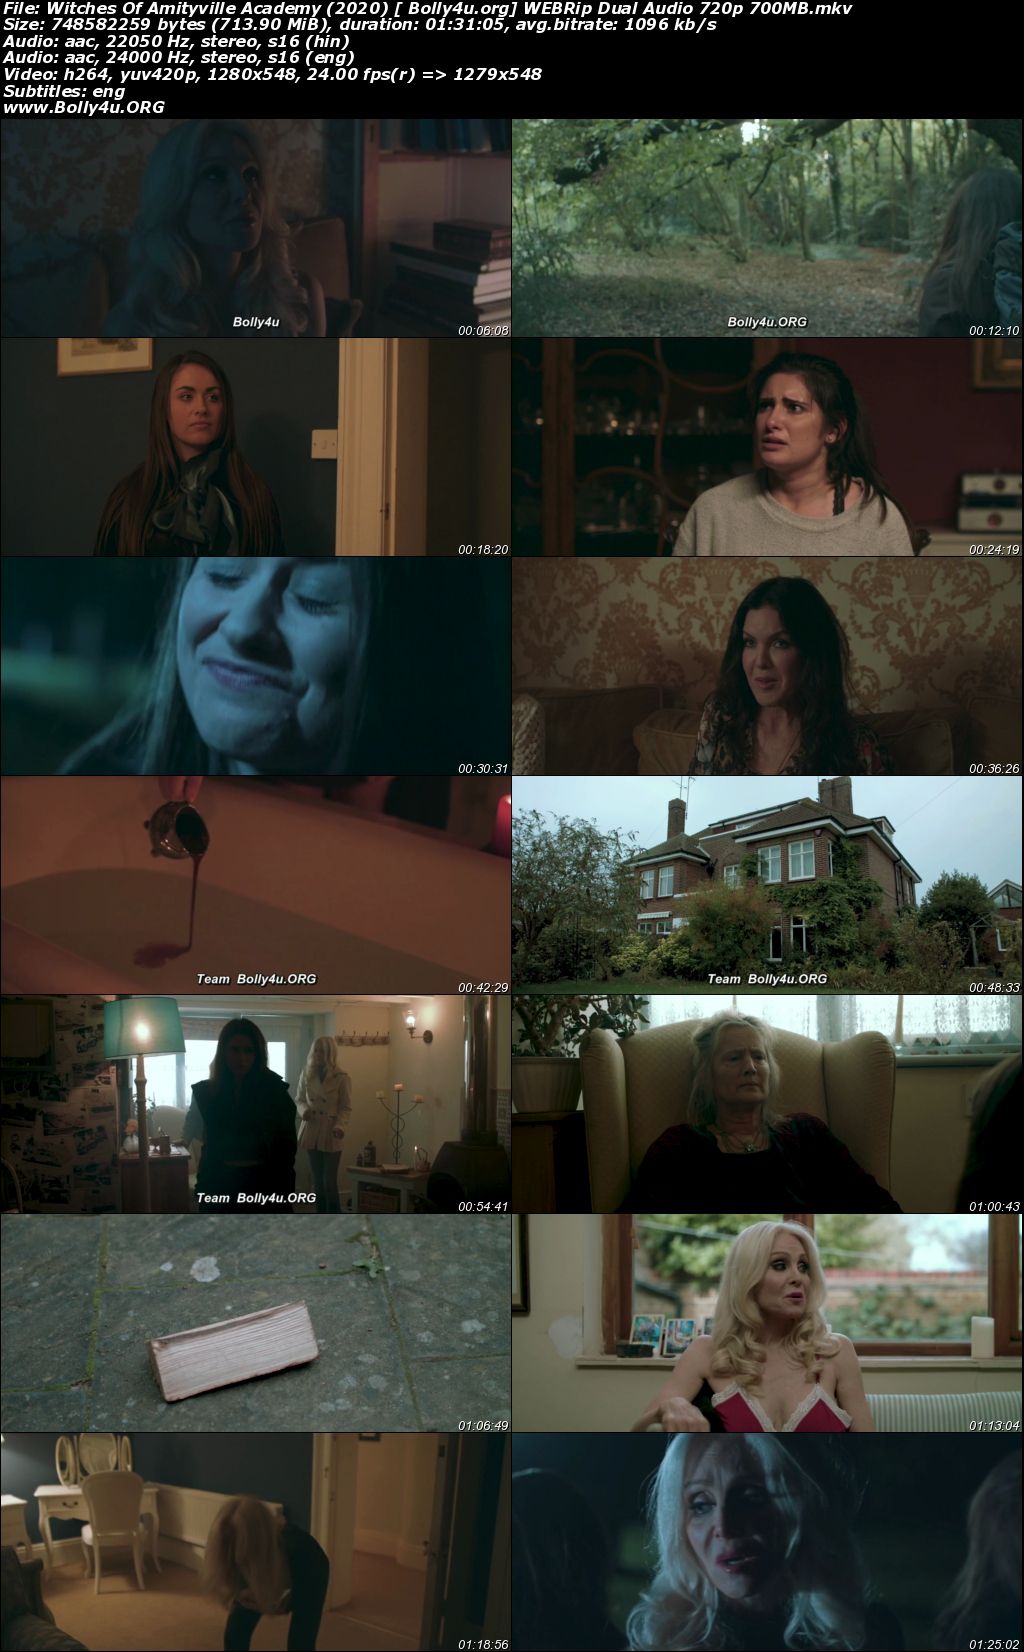 Witches Of Amityville Academy 2020 WEBRip 700Mb Hindi Dual Audio 720p Download